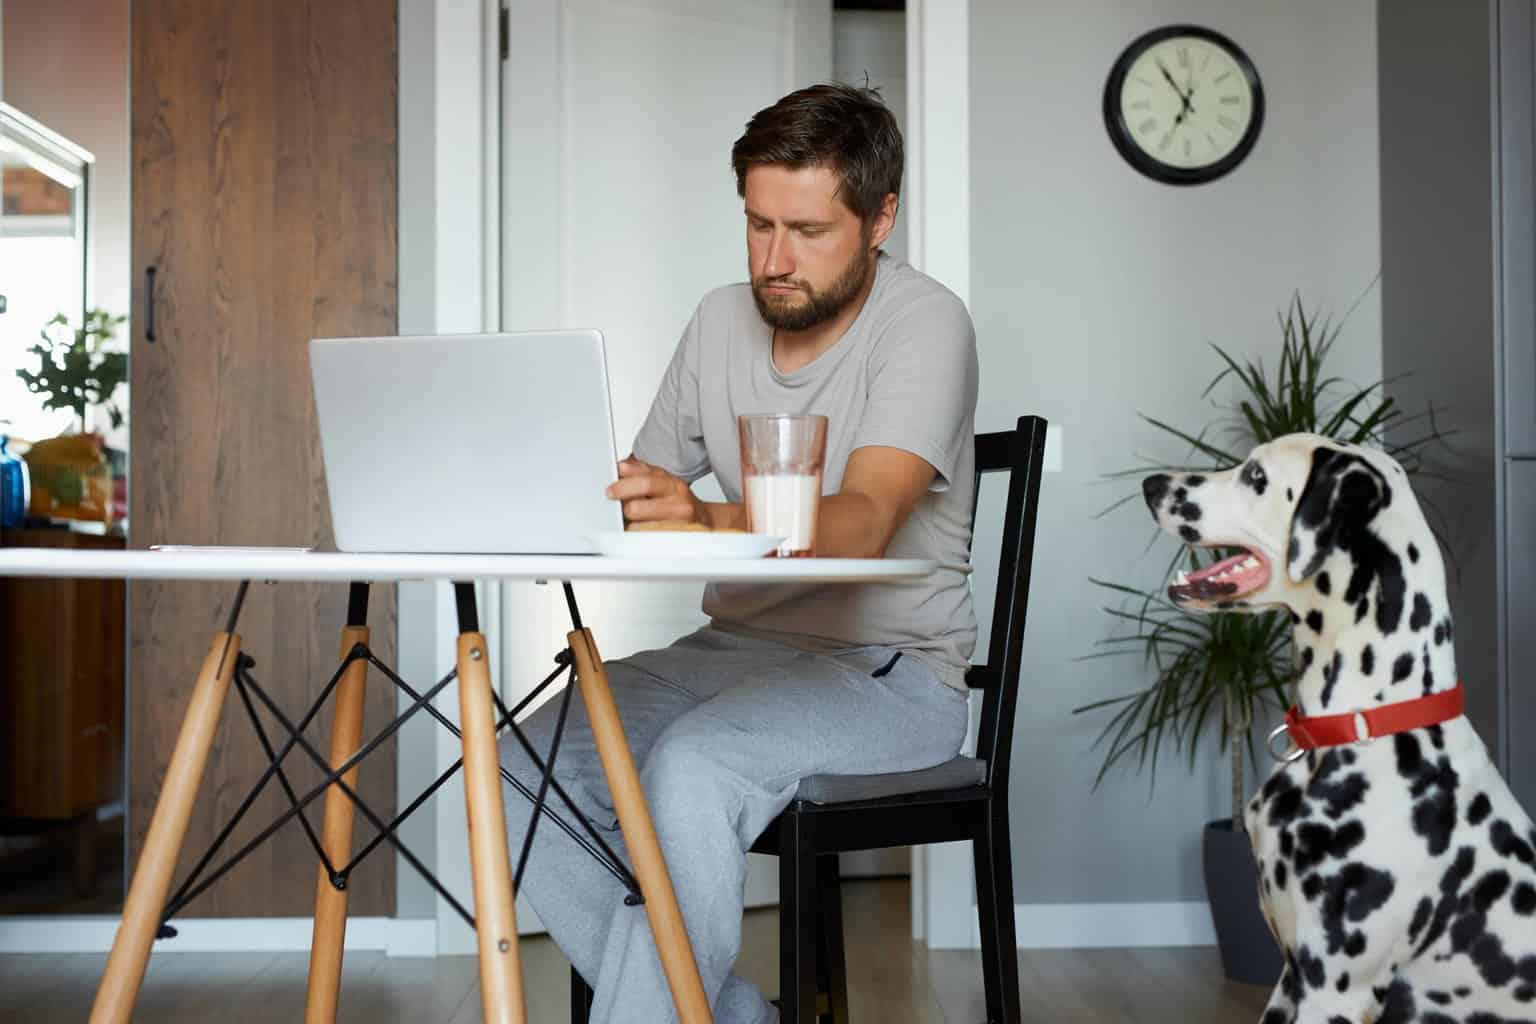 Male college student studies while Dalmatian watches. Dogs make college students healthier. Having a dog reduces stress by encouraging owners to enjoy fresh air and exercise outside.